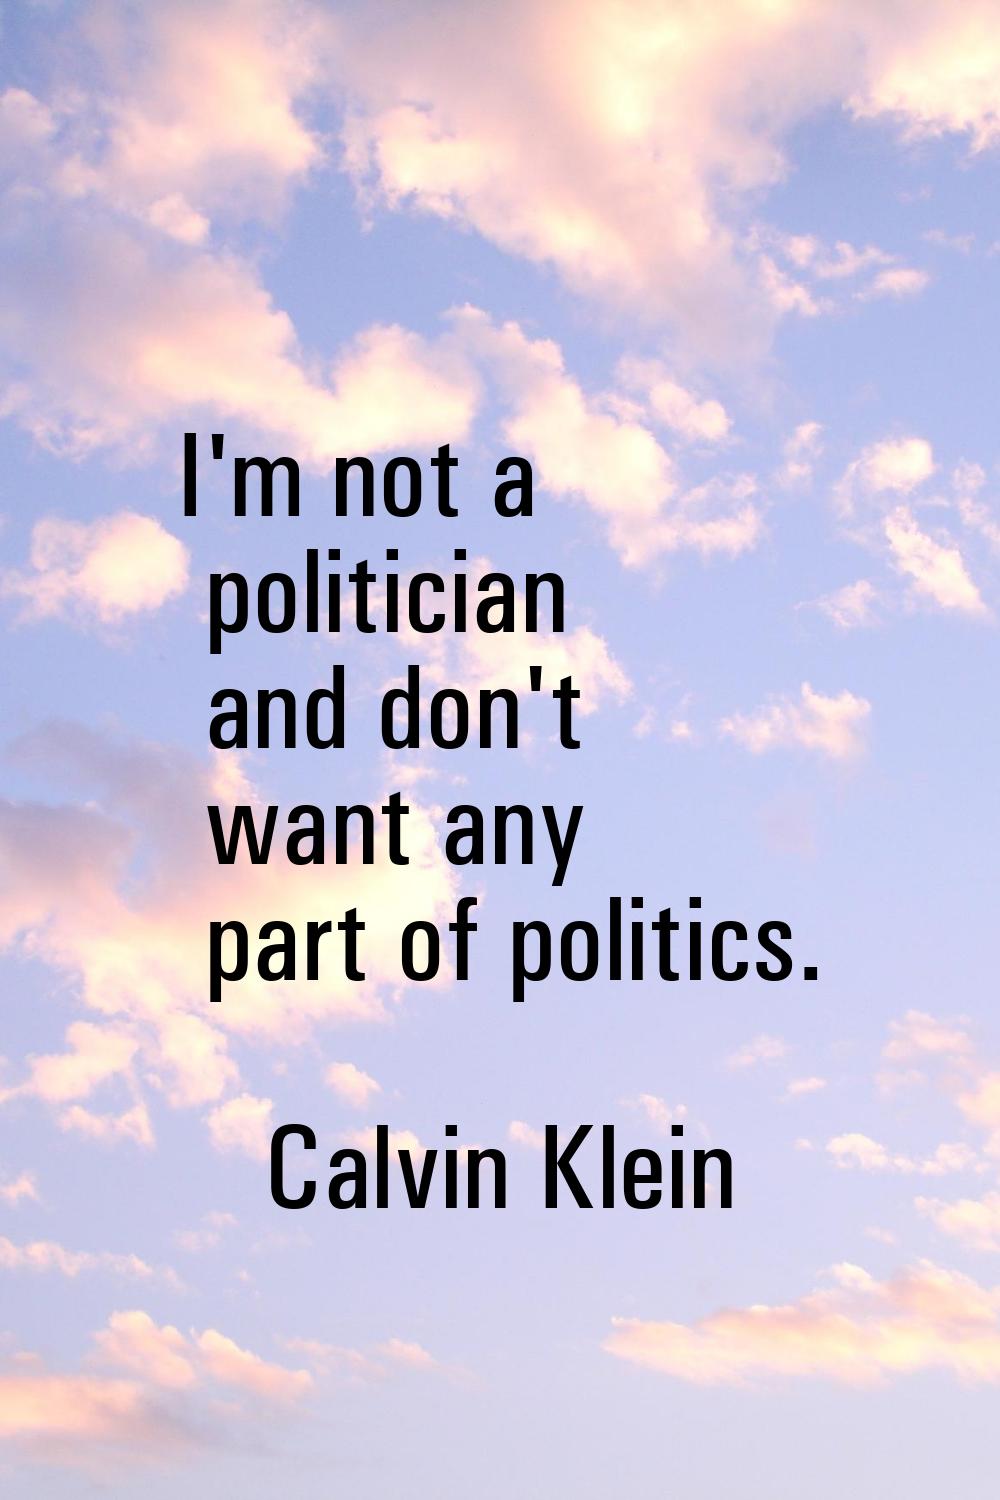 I'm not a politician and don't want any part of politics.